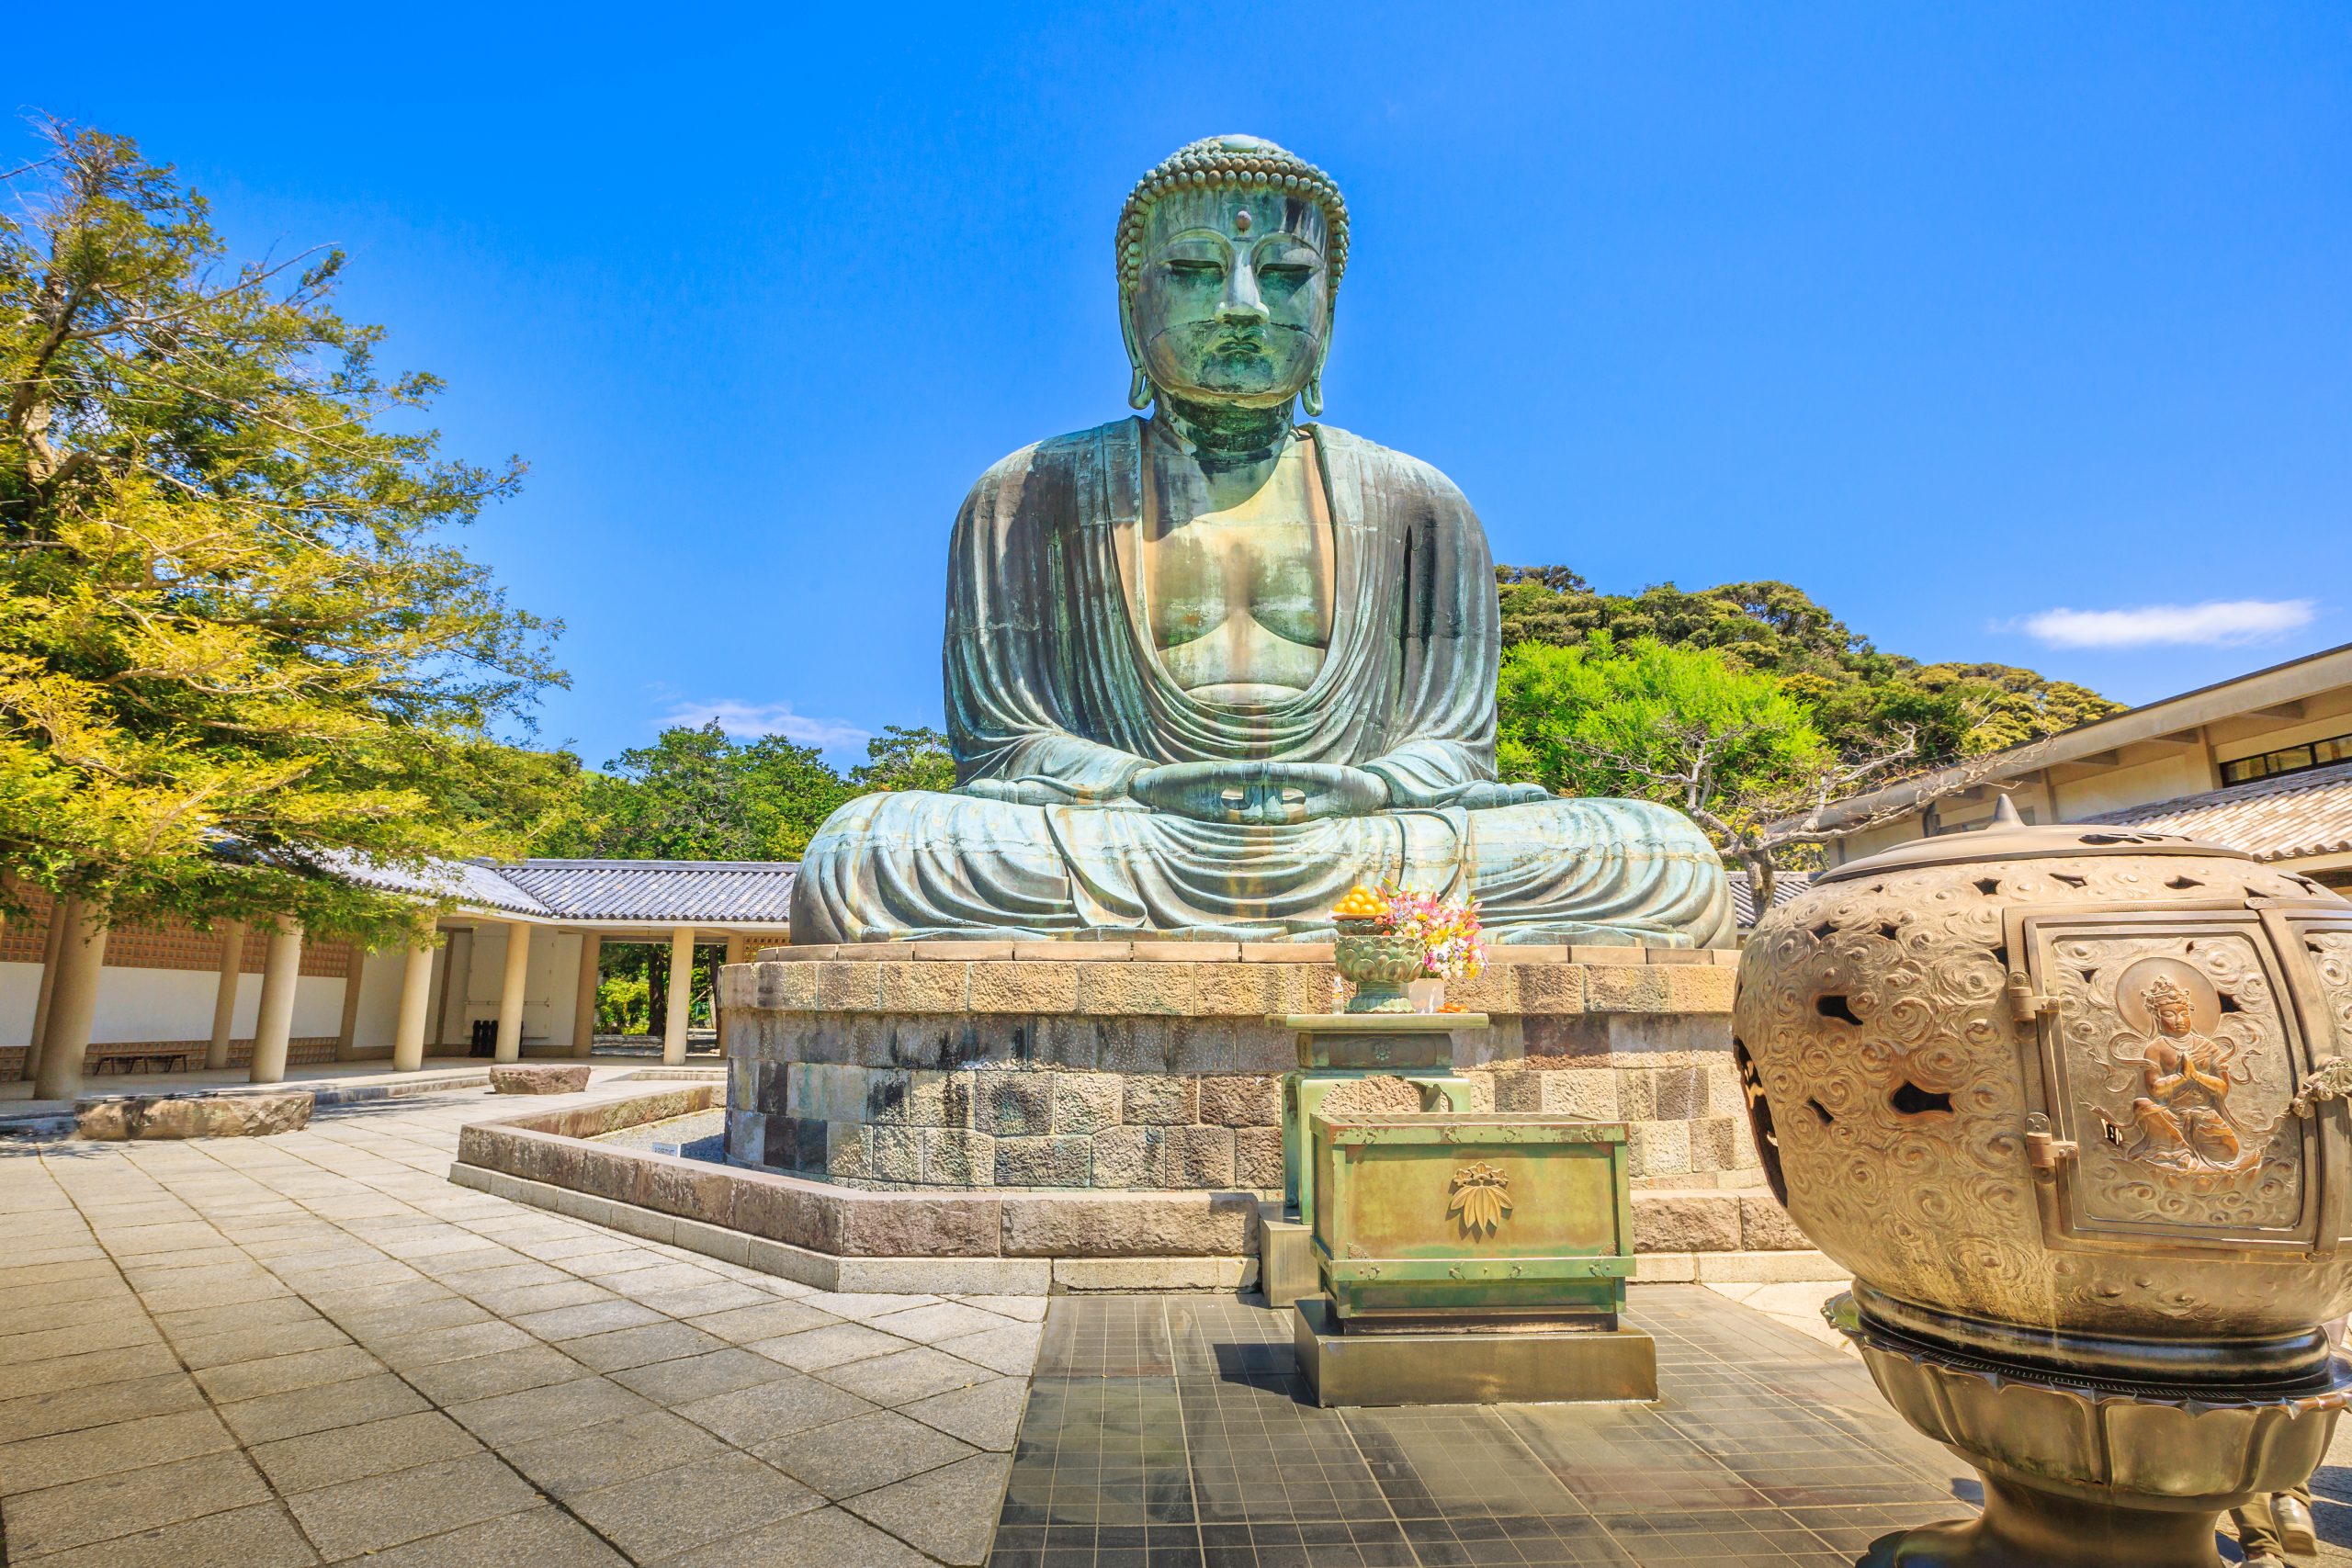 Discover The Great Buddah In The Kotoku-in Temple On Your Kamakura Walking Tour And Tea Ceremony